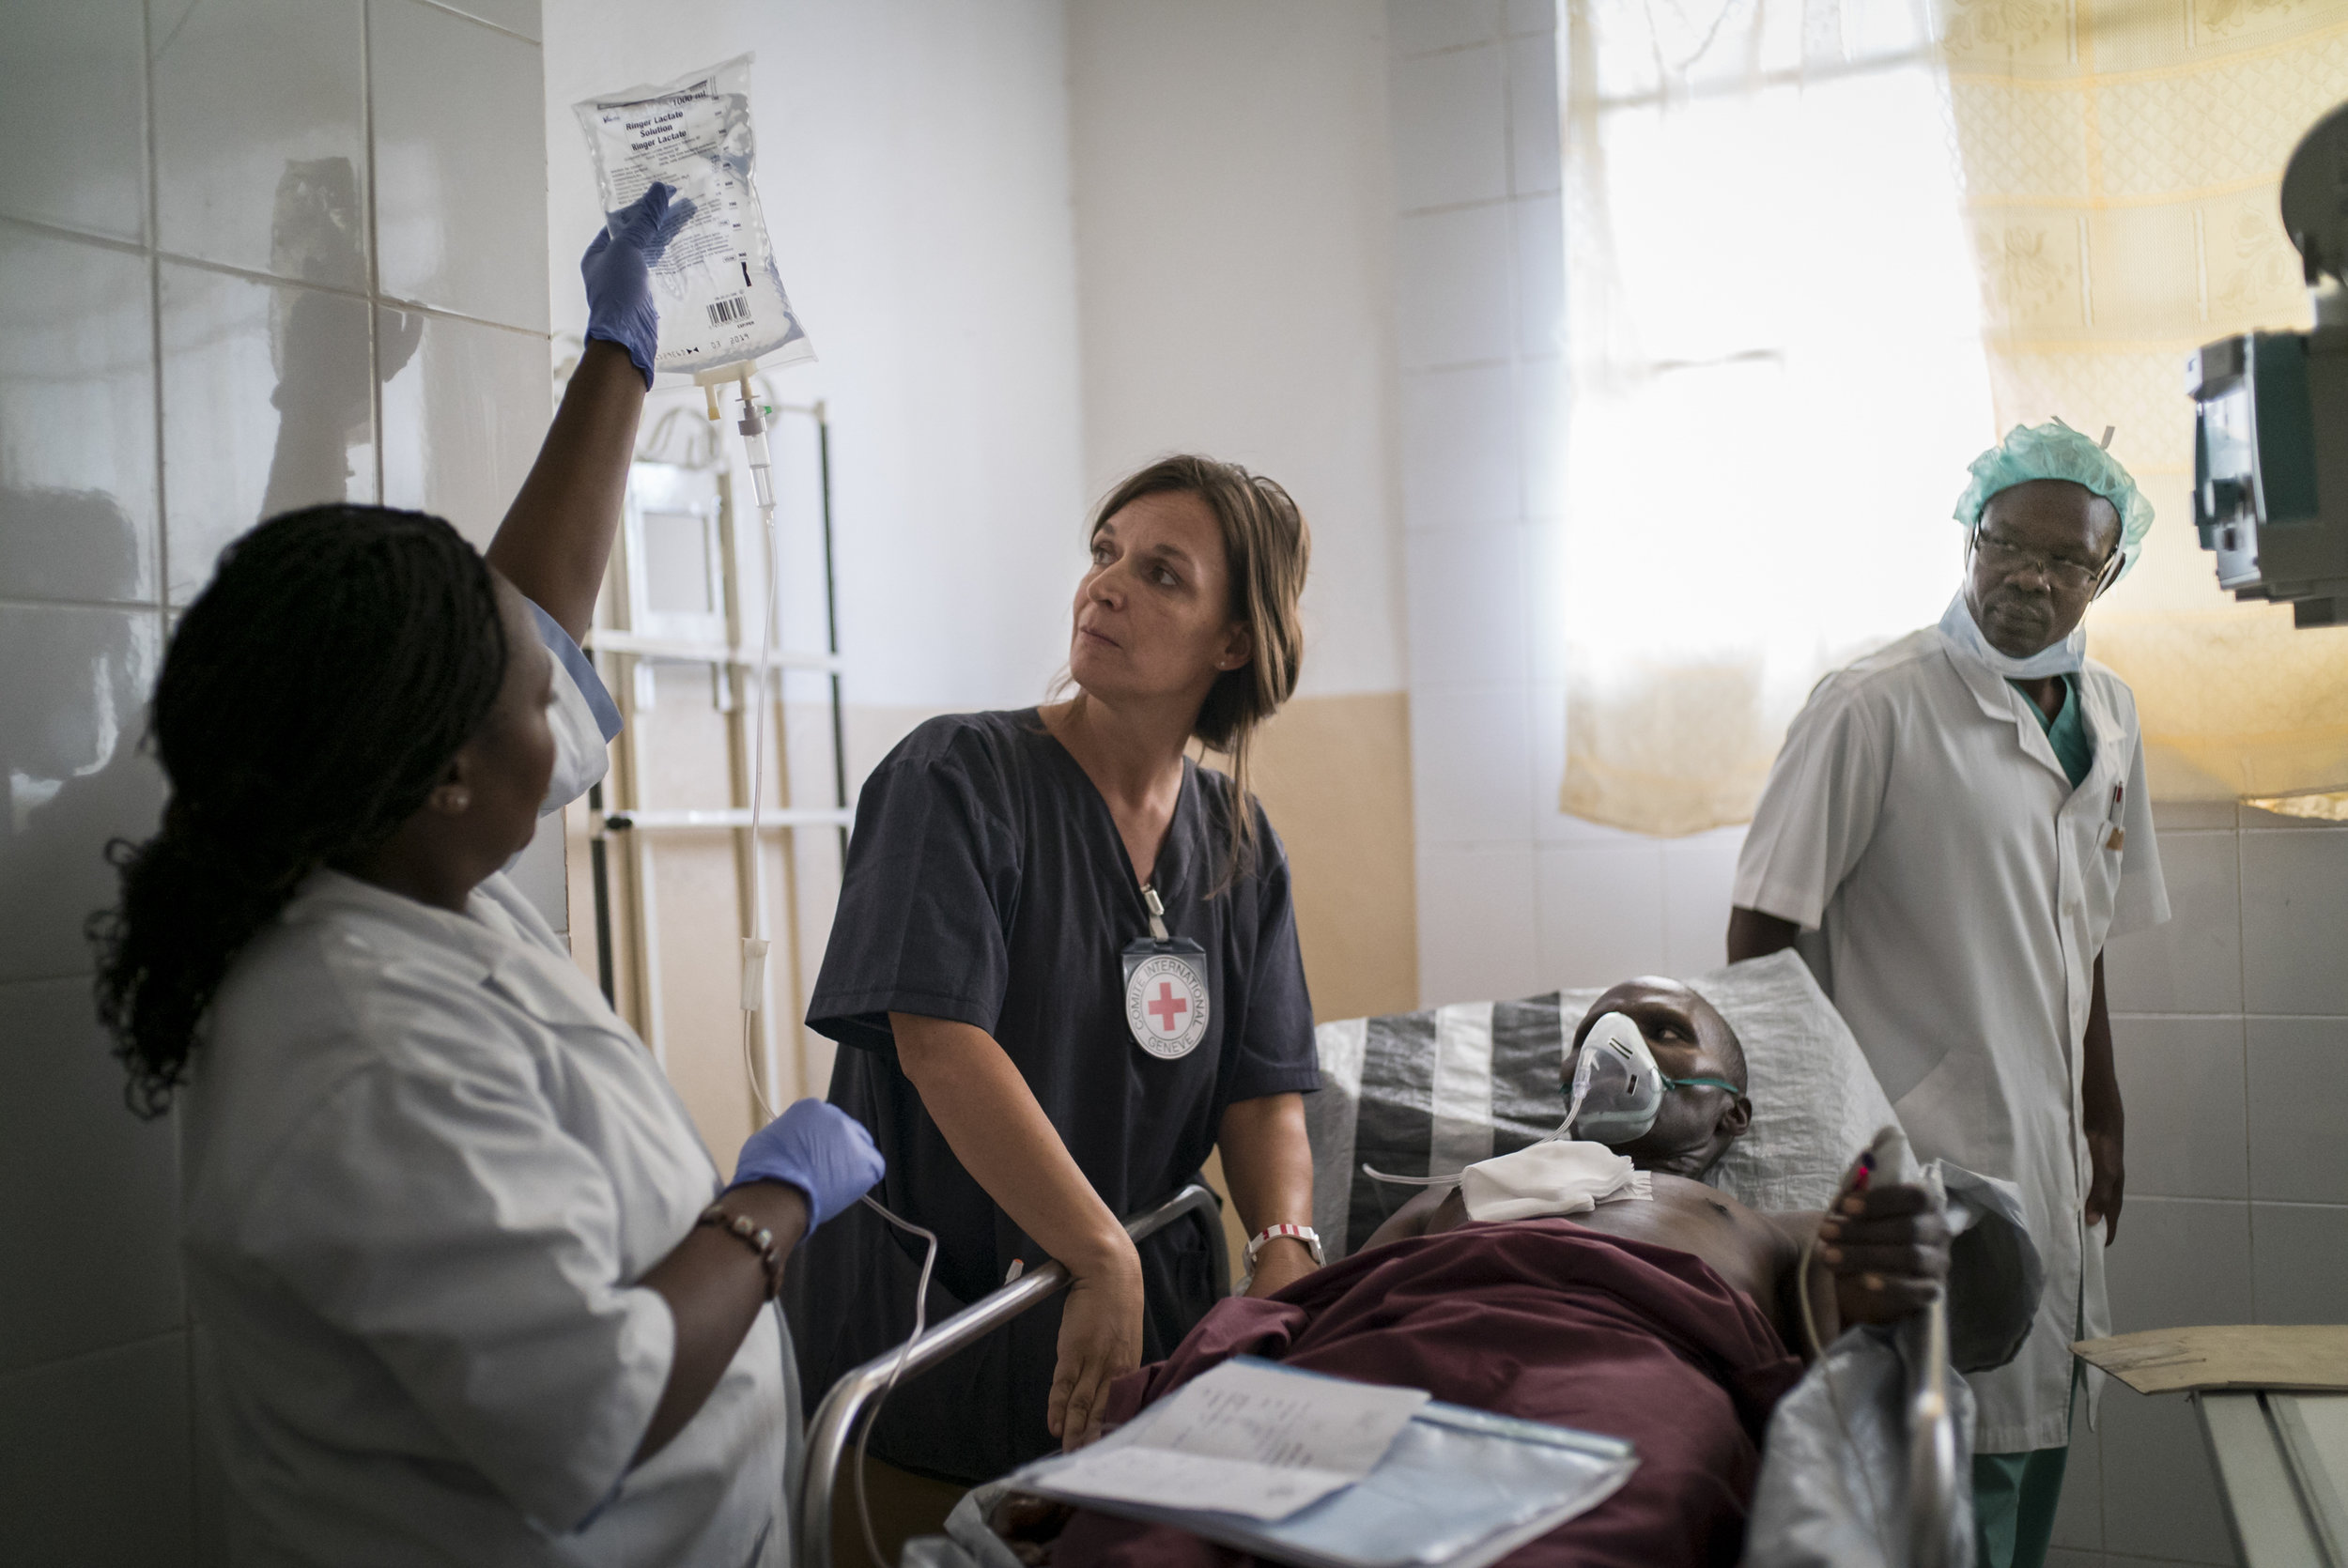  Anne Muller, the head nurse of the surgical team at Ndosho hospital in Goma, DRC, prepares a patient for emergency surgery. The patient, Patrick Gasana Wabazazo, 44, was shot in the chest (thorax) when he was caught in a crossfire between armed men 